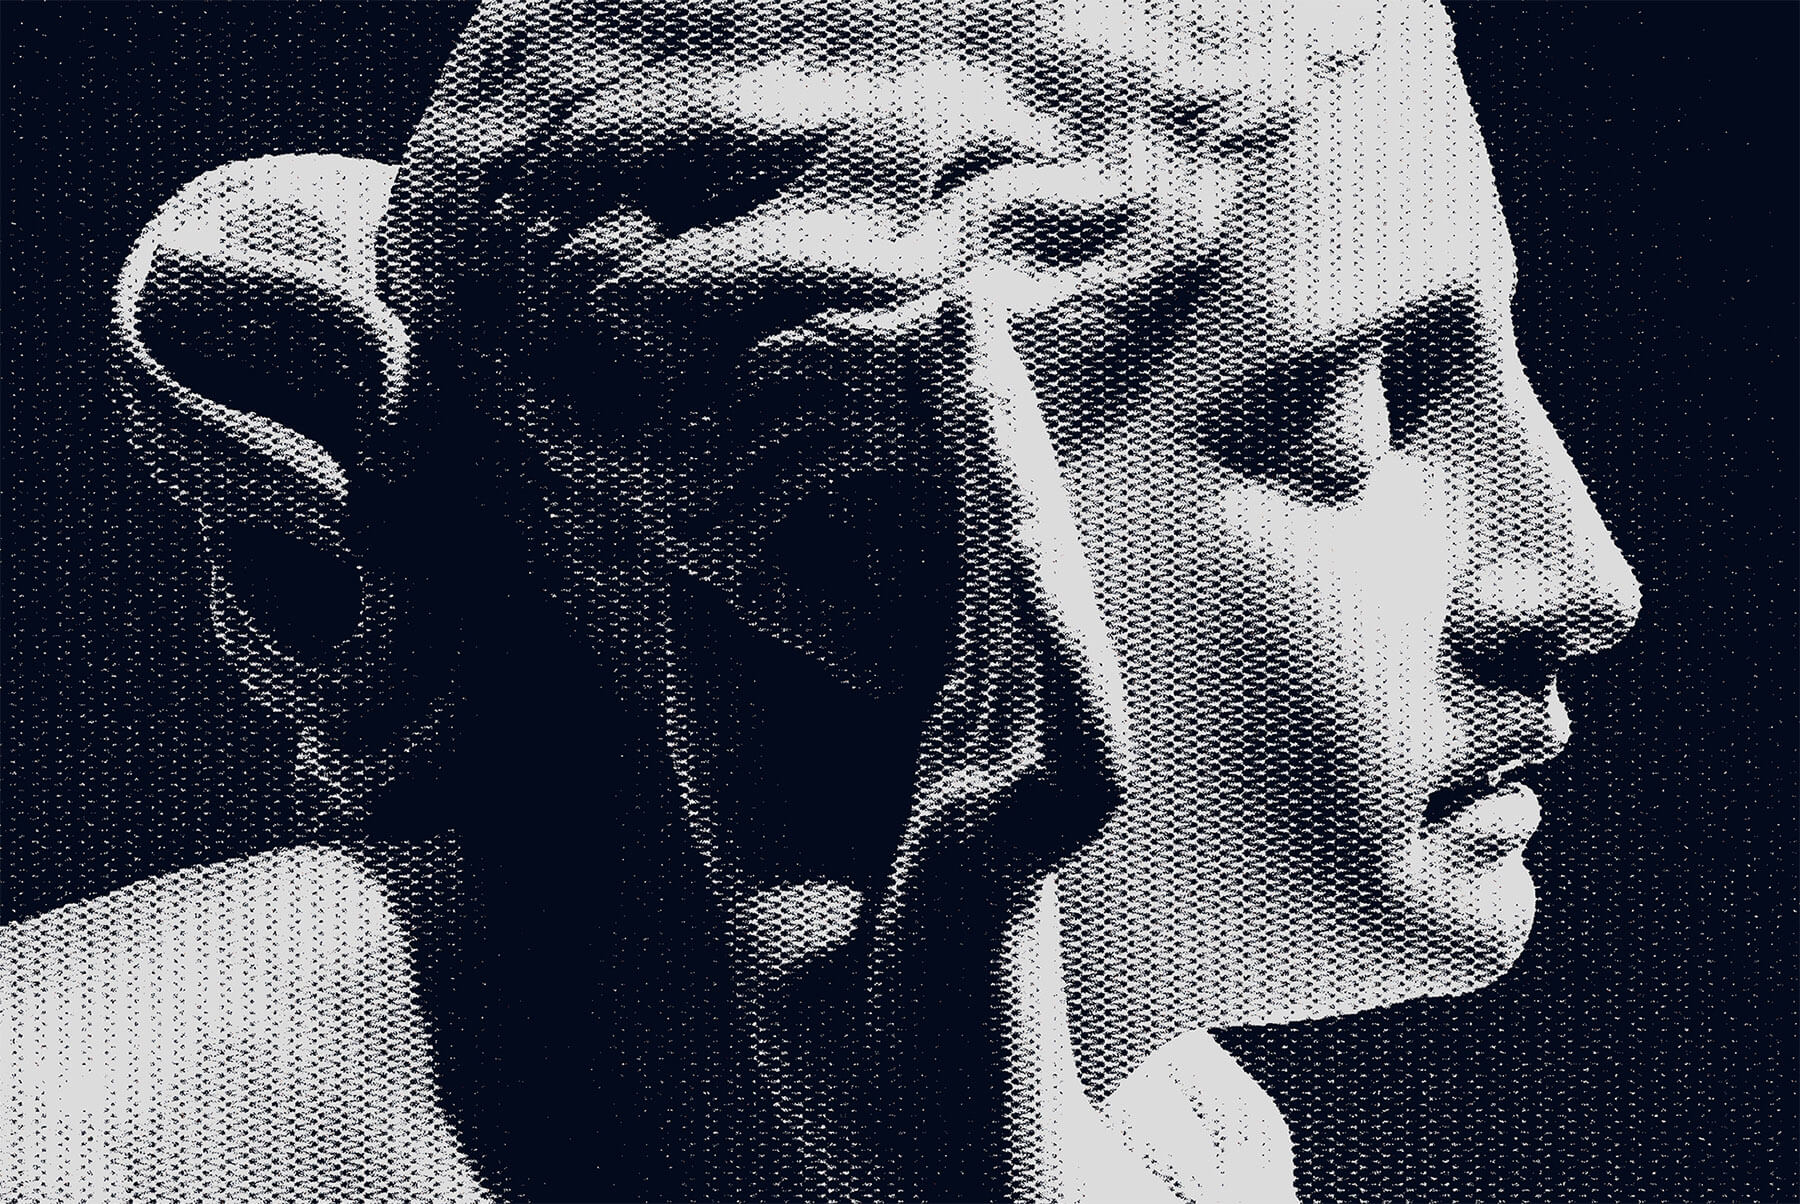 Stylized digital graphic of classical sculpture for use in mockups, templates, or graphics design projects, with a monochromatic dot pattern.